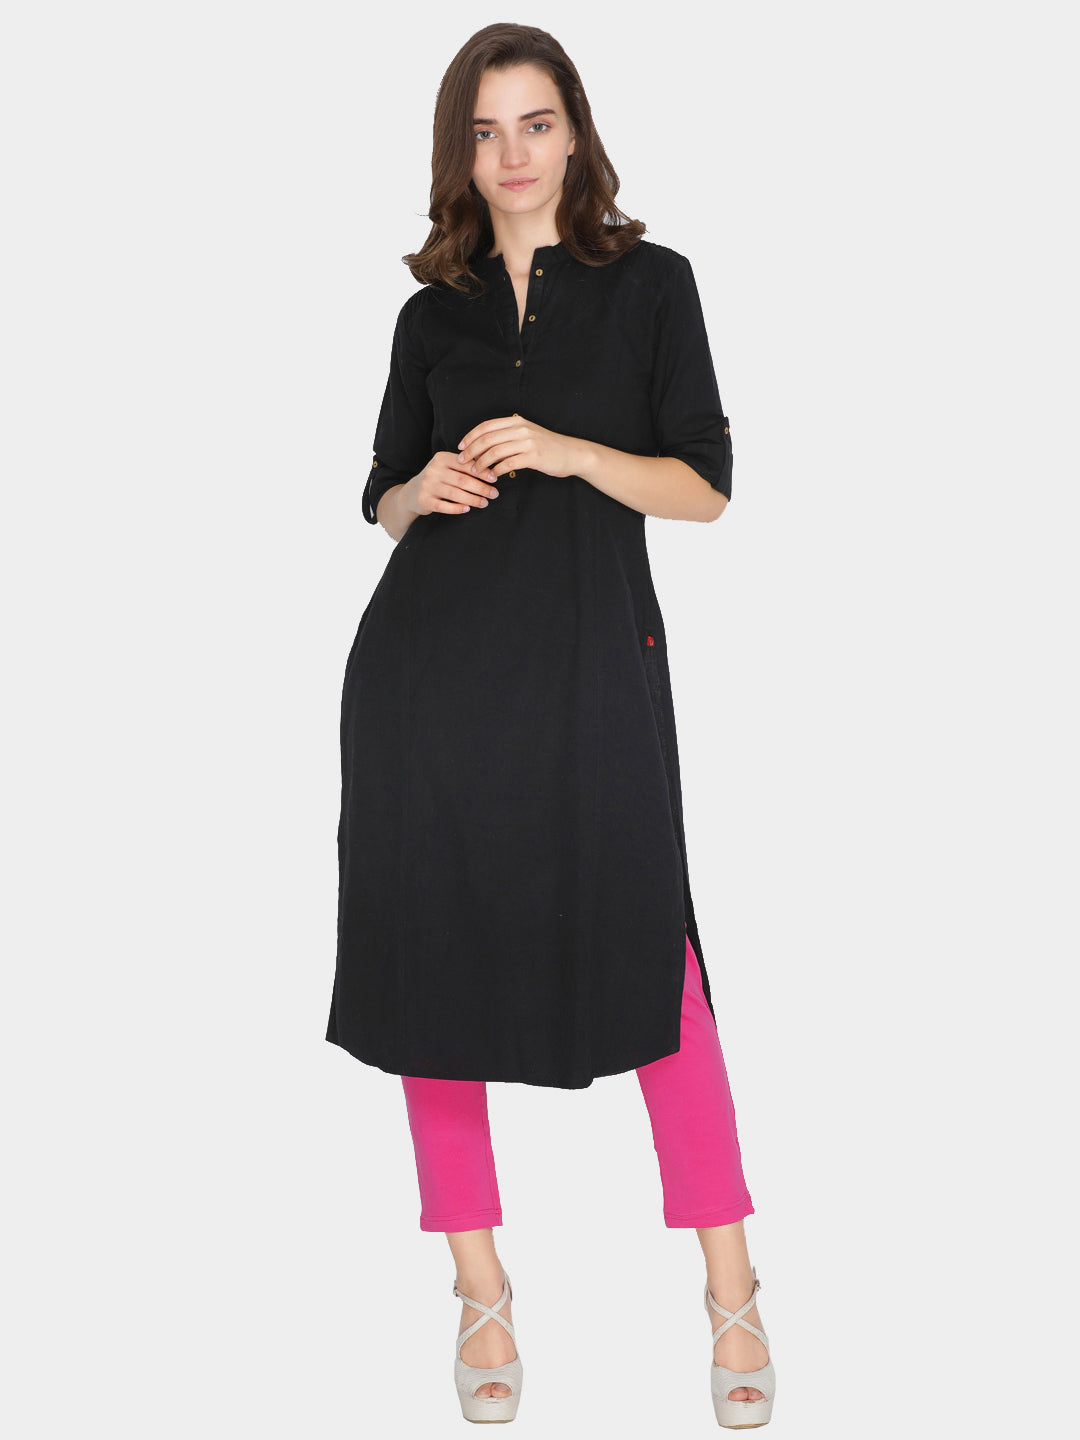 Discover more than 62 black and pink kurti best